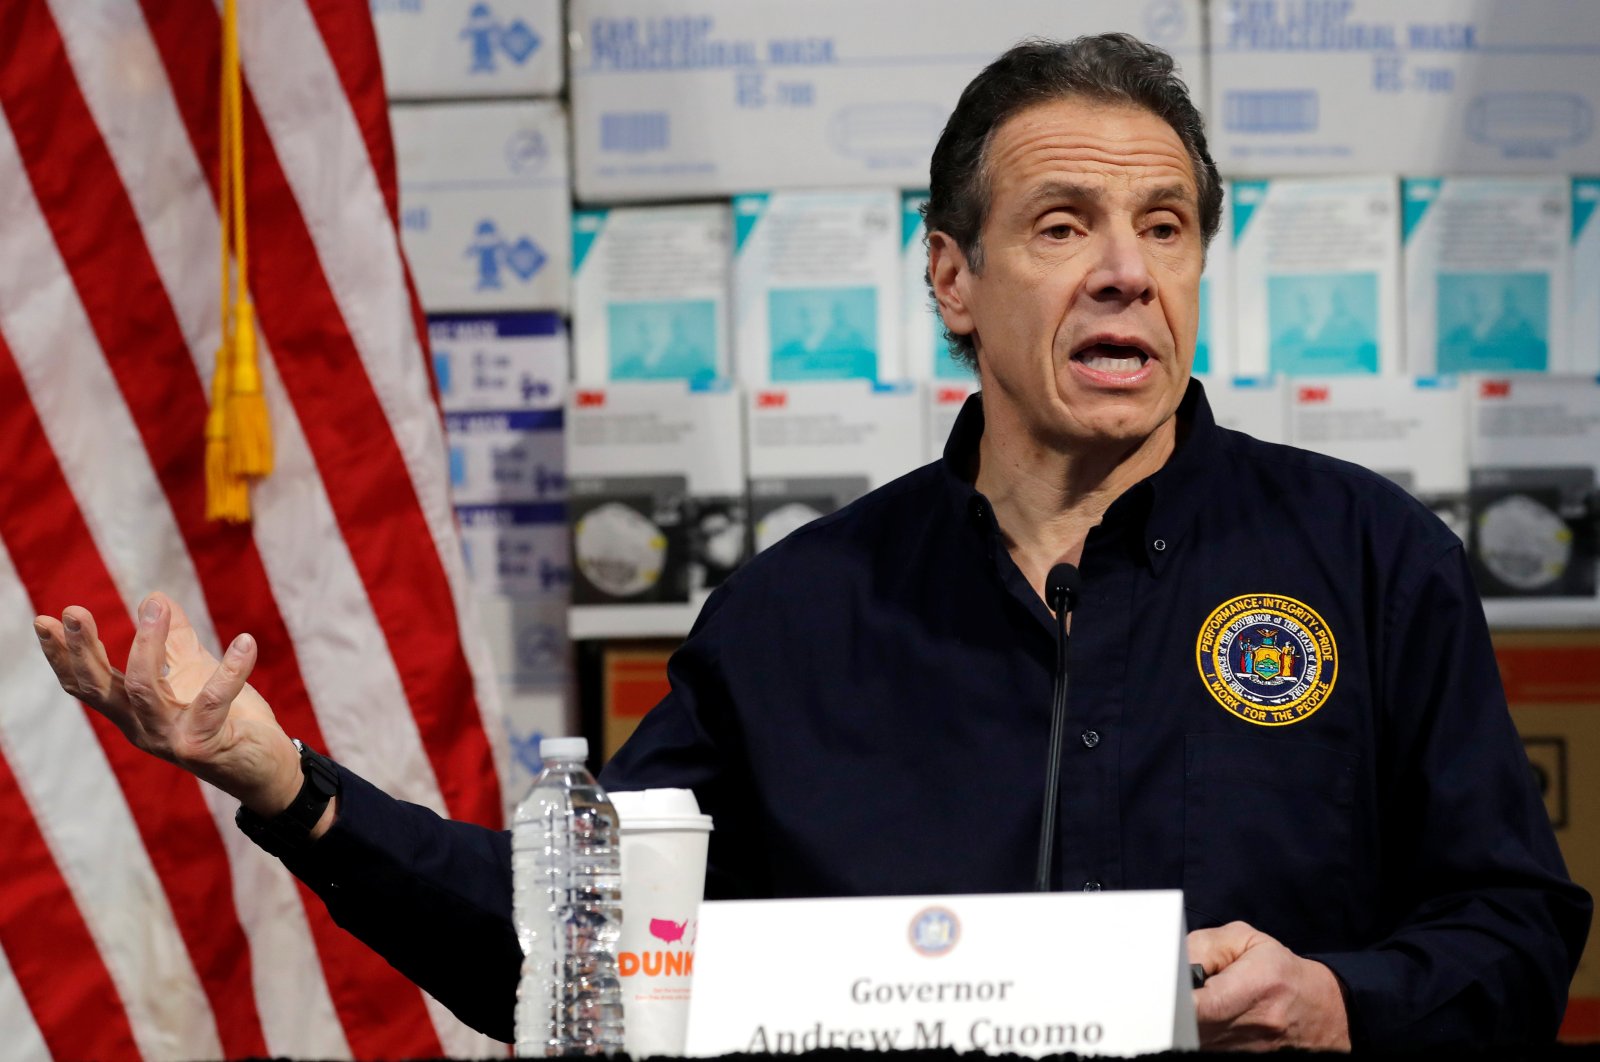 New York Governor Andrew Cuomo speaks in front of stacks of medical protective supplies during a news conference at the Jacob K. Javits Convention Center in New York, U.S., March 24, 2020. (Reuters Photo)